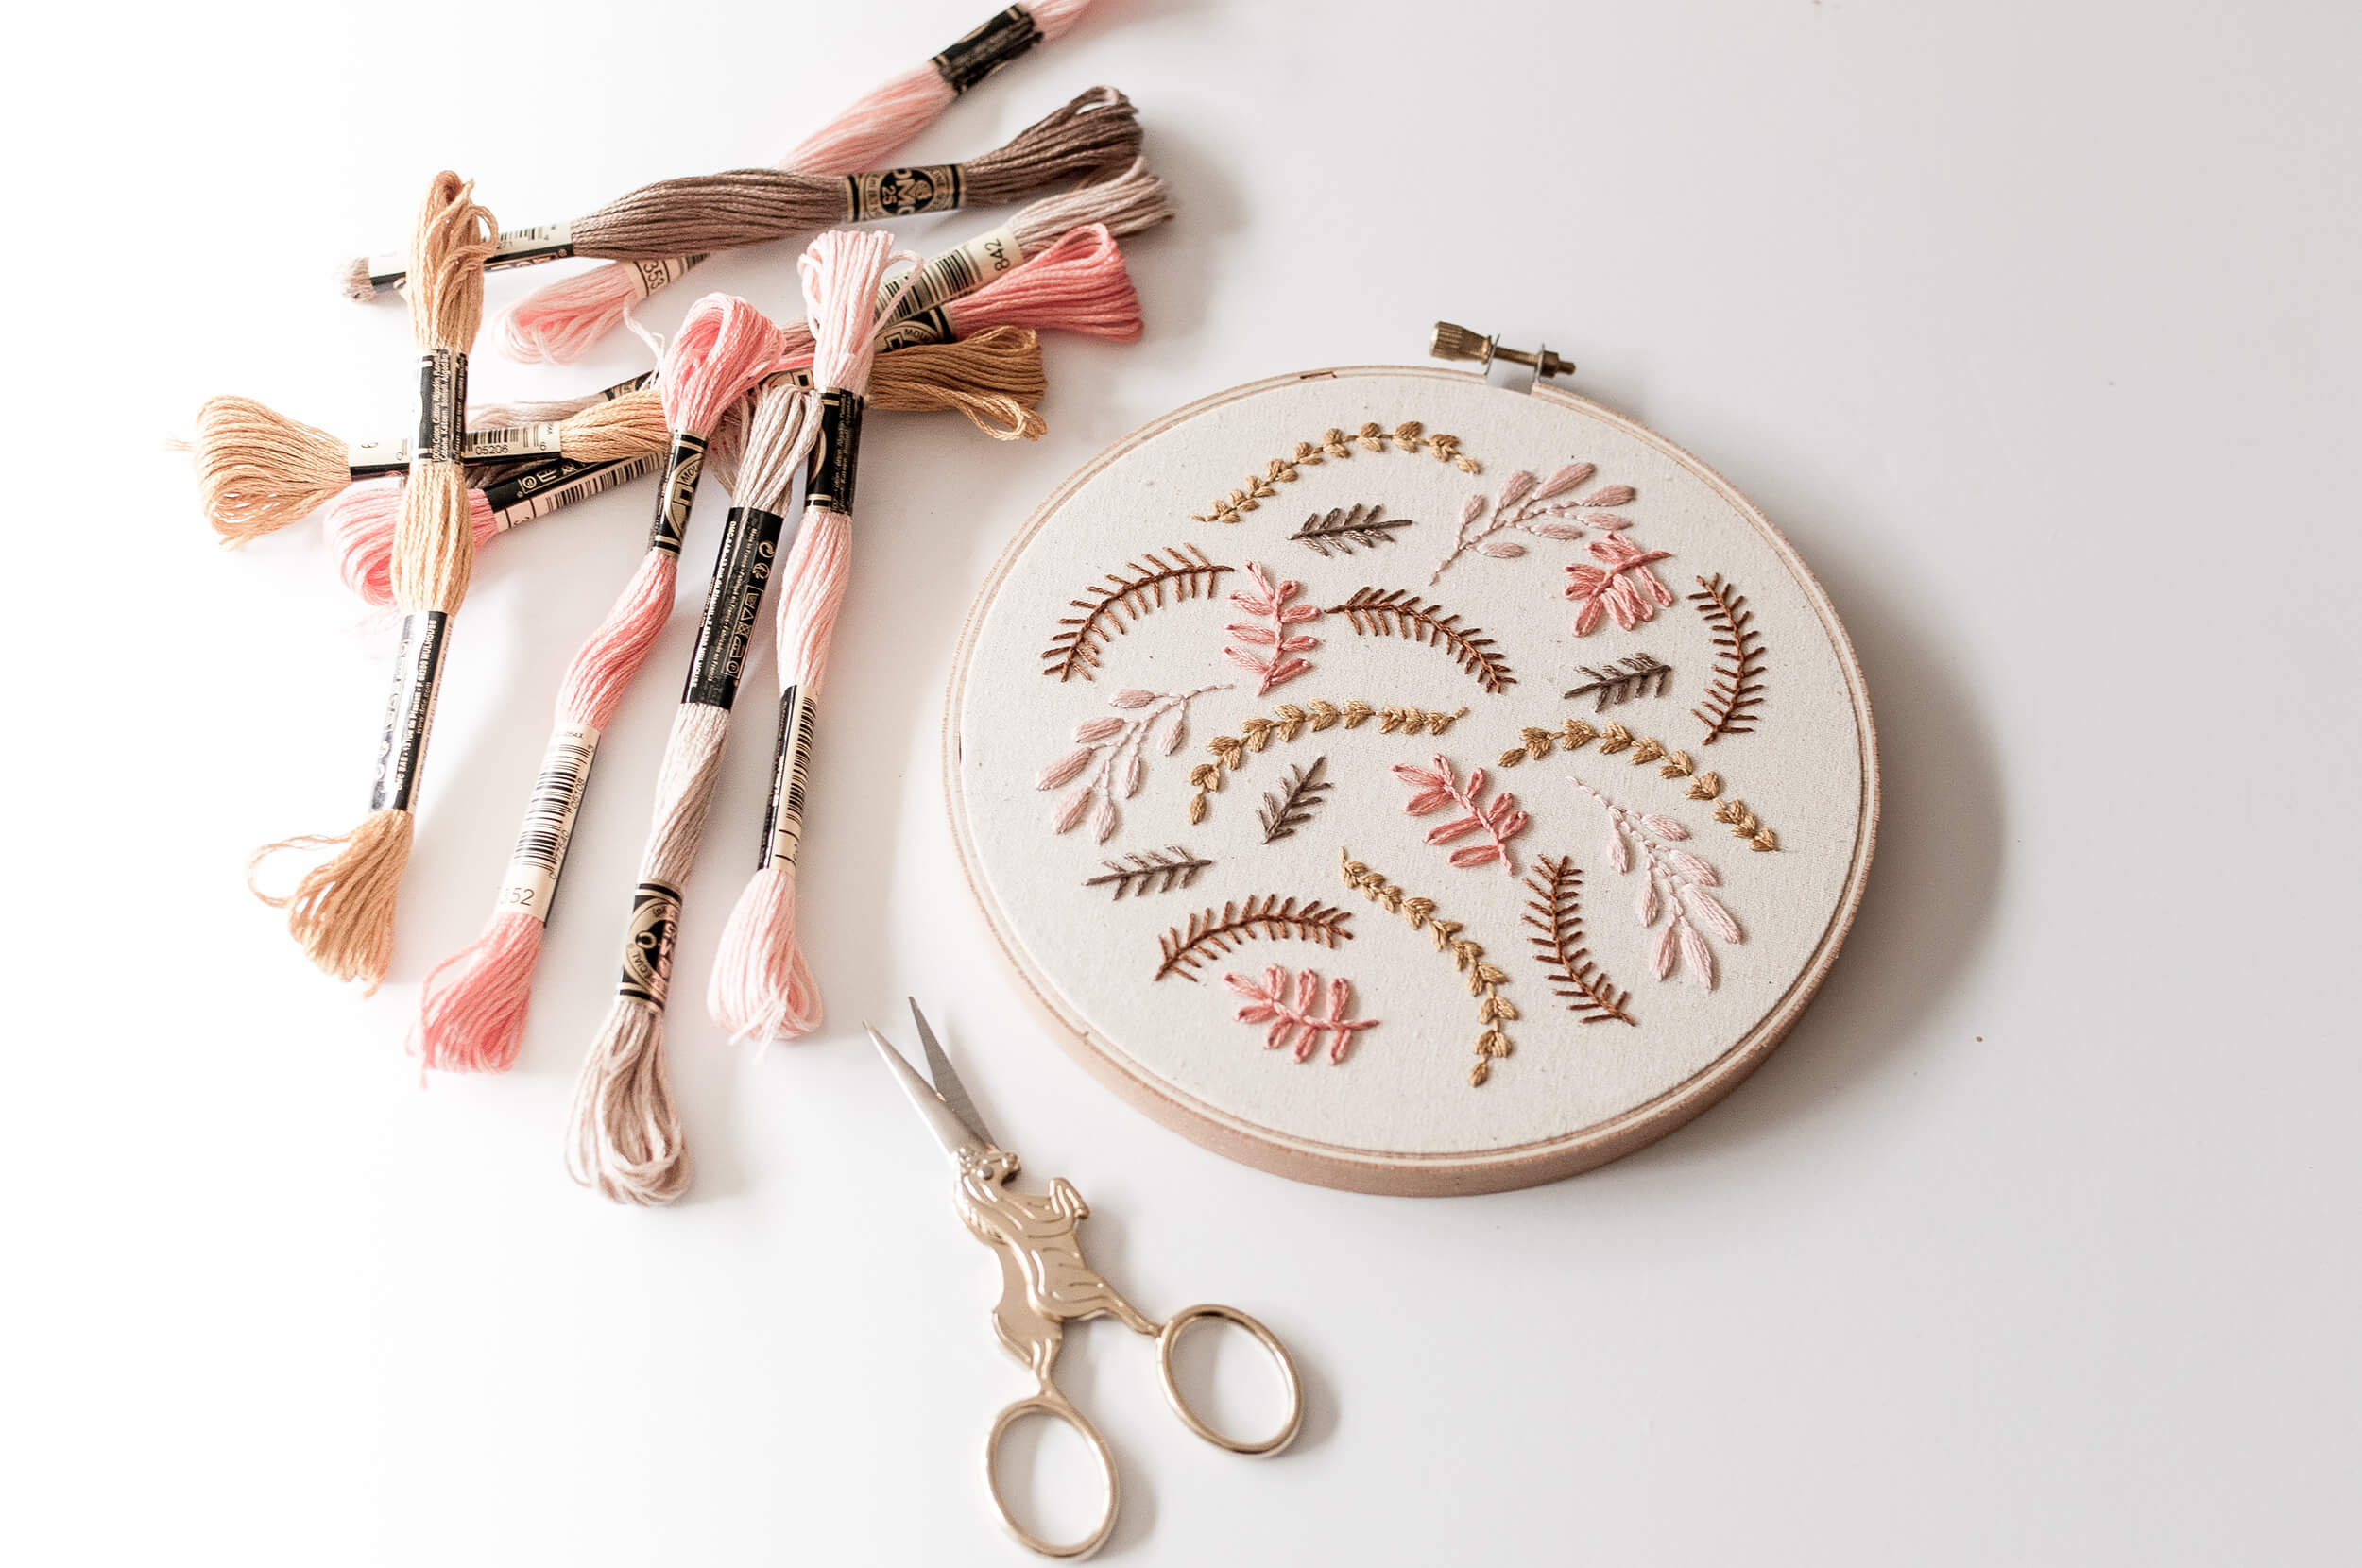 Coral Breeze Embroidery Pattern - Brynn & Co.